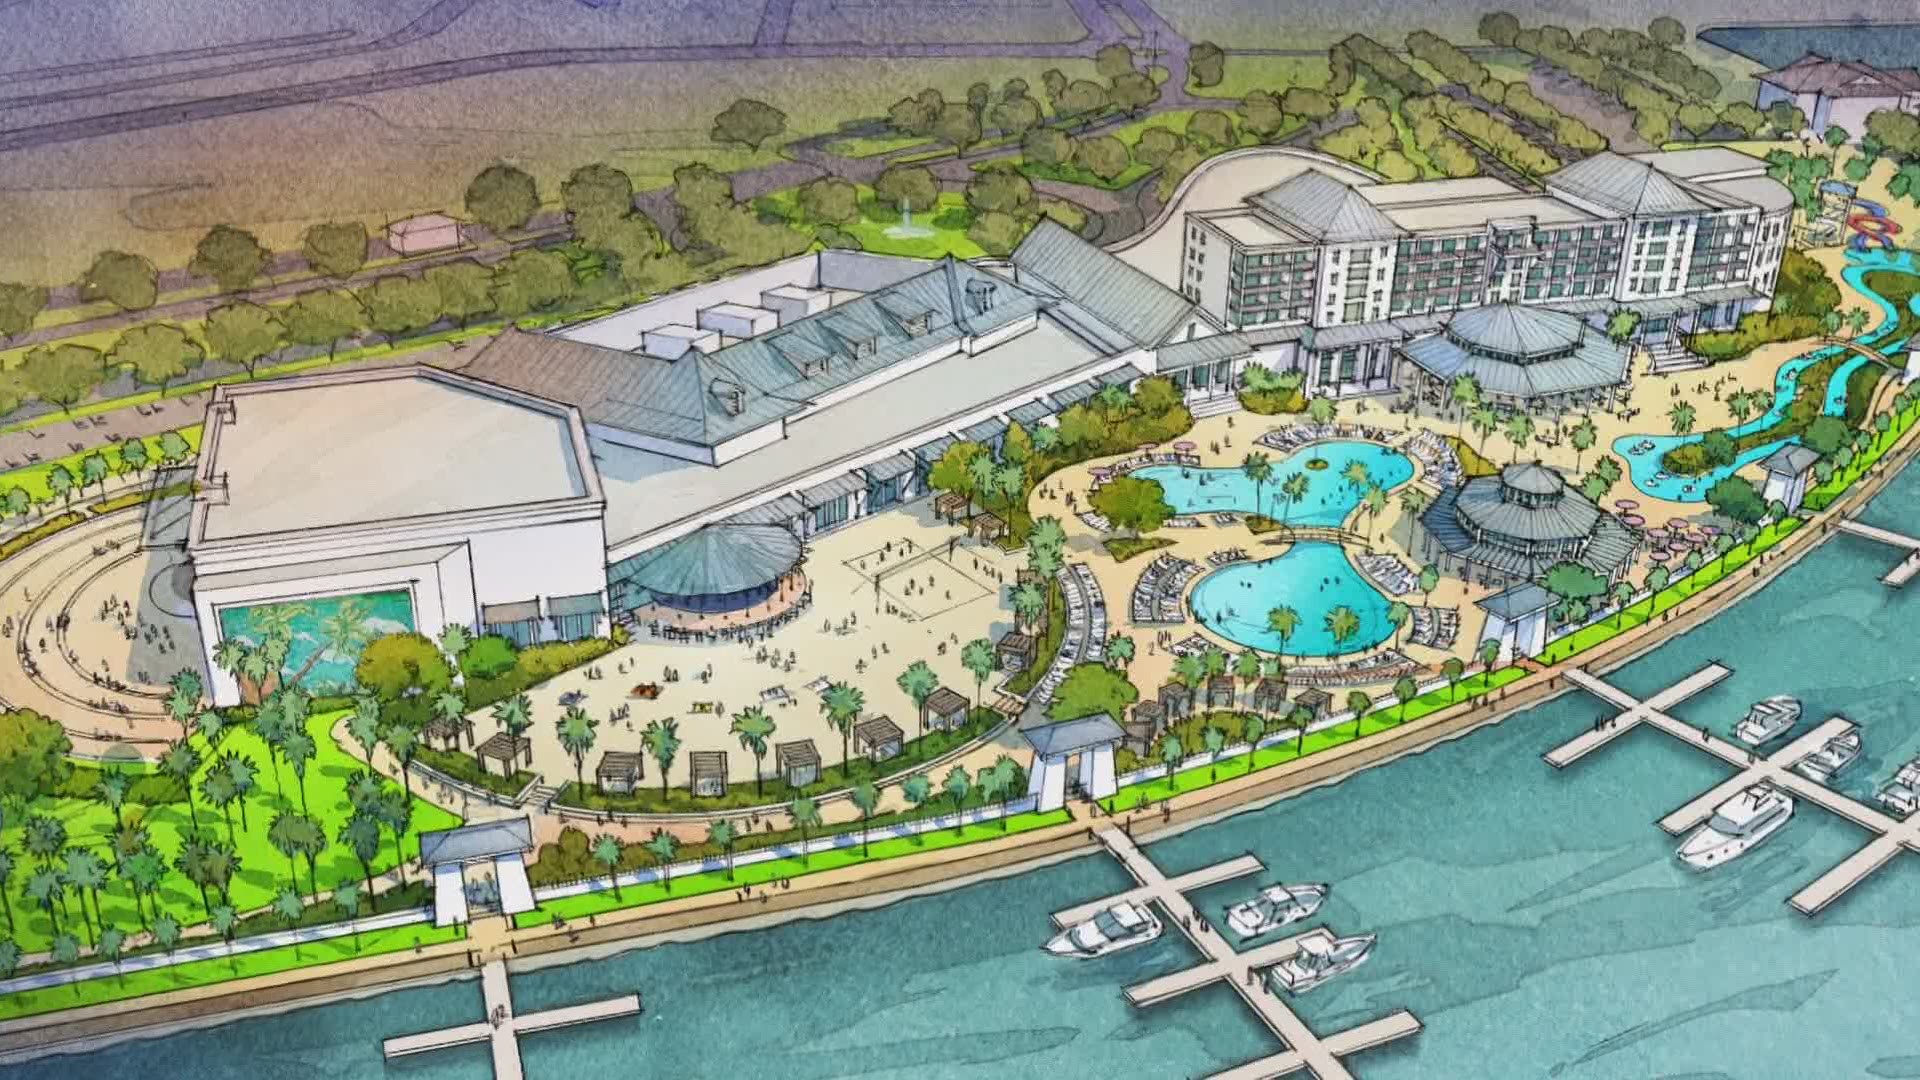 St. Tammany Parish leaders announced another $75 million in projects around a proposed casino in Slidell.